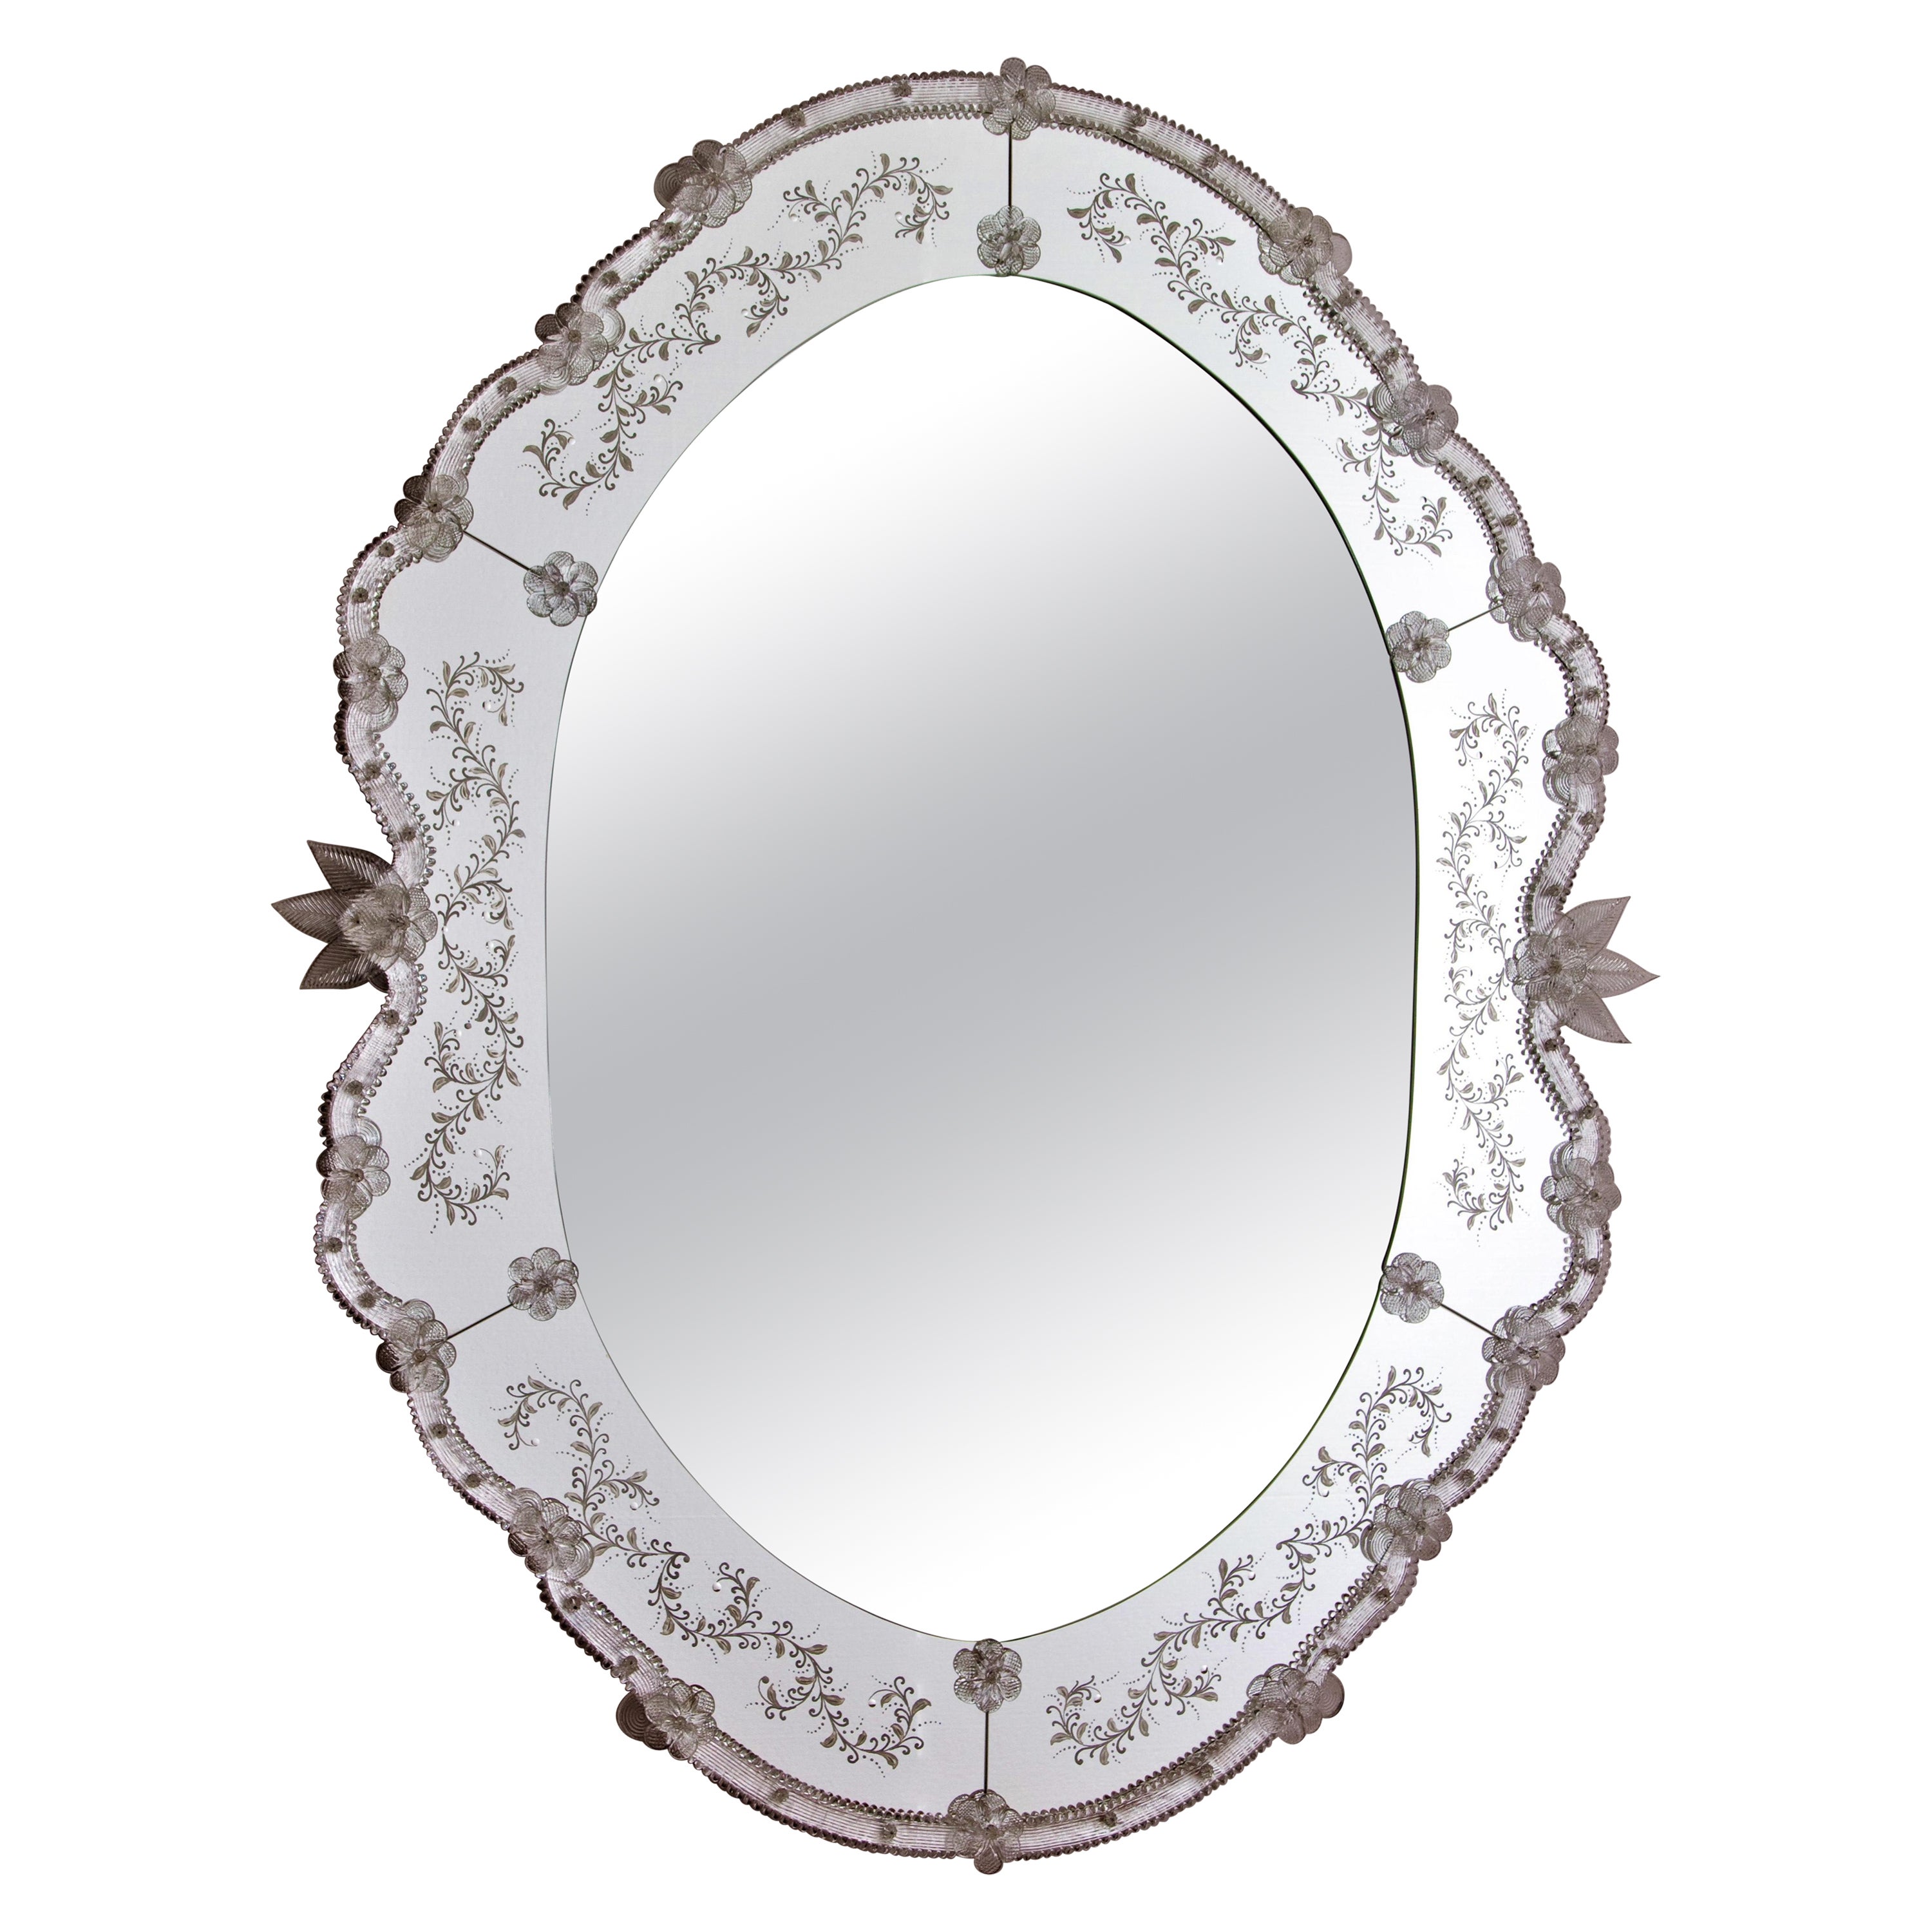 "Venezia" Murano Glass Mirror in Venetian Style by Fratelli Tosi, Made in Italy For Sale